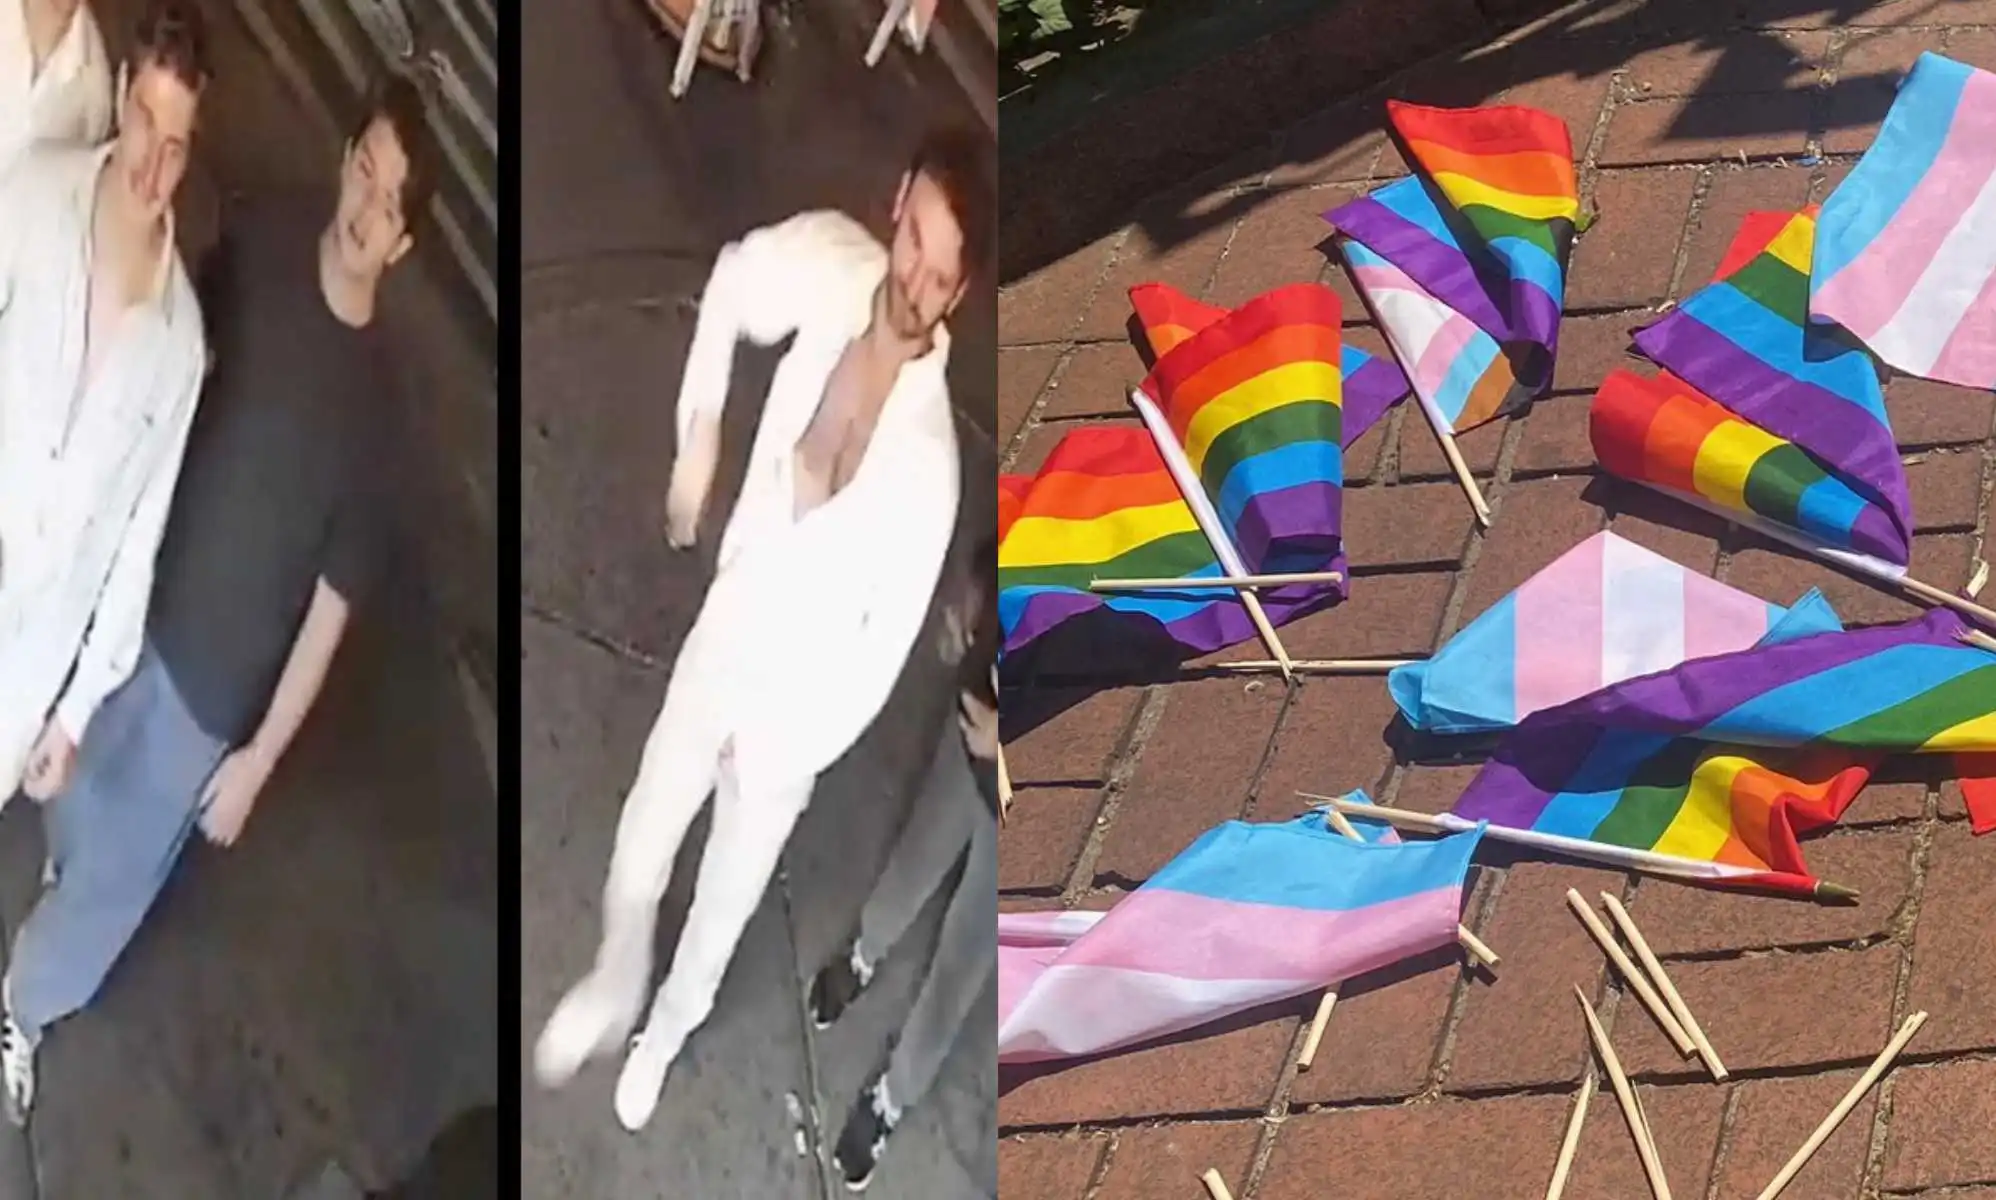 Dozens of Pride flags vandalized at Stonewall monument in NYC, 3rd time this month: Police